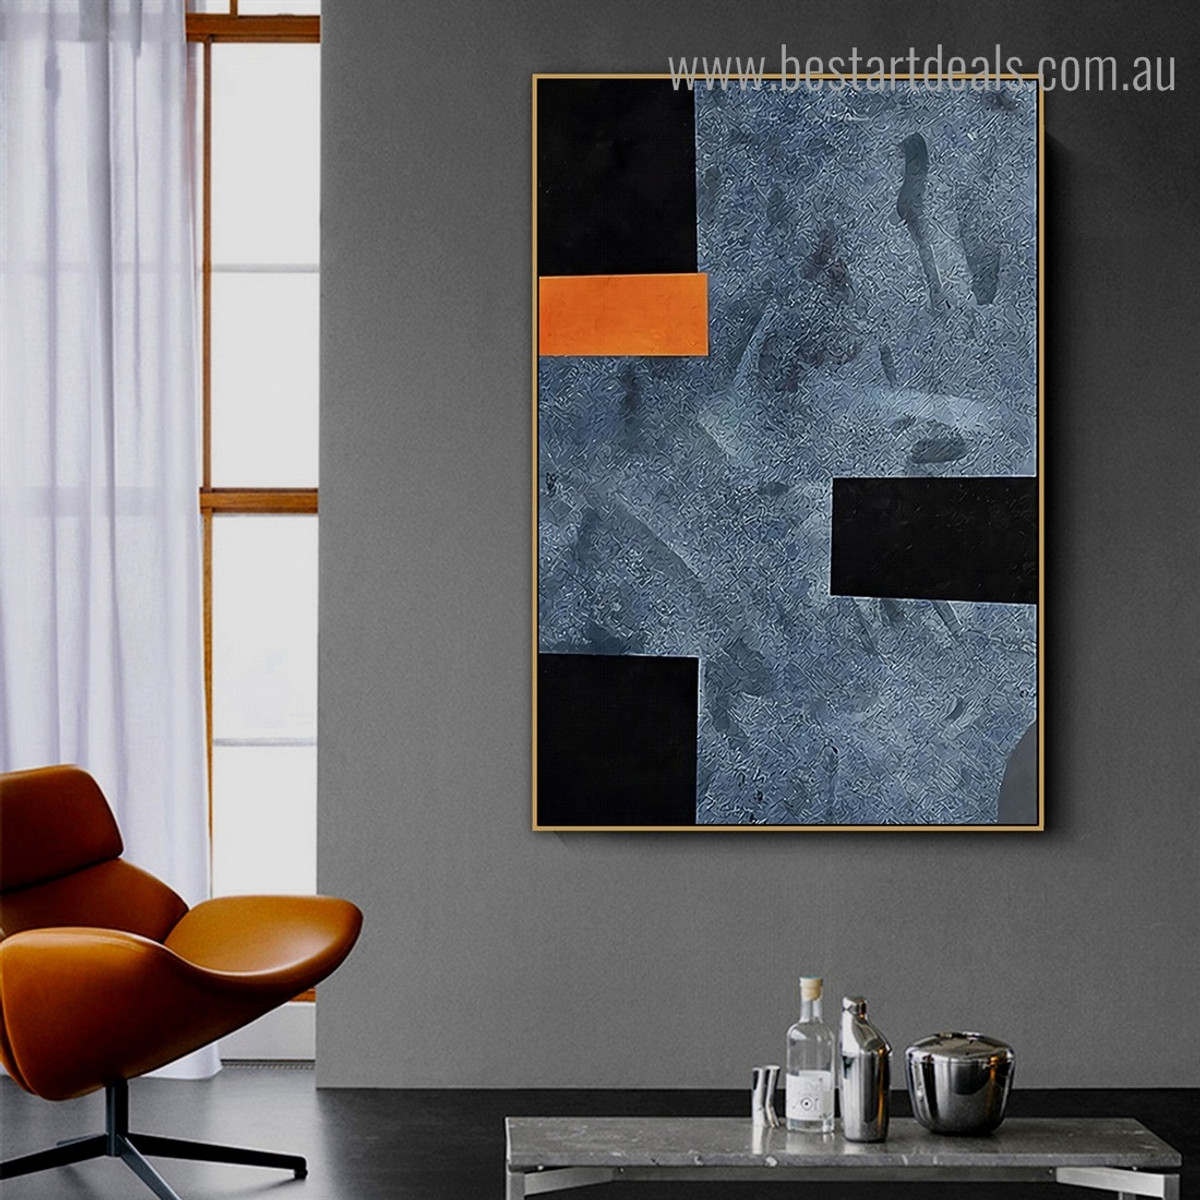 Rectangular Square Abstract Modern Framed Artwork Photo Canvas Print for Room Wall Decor